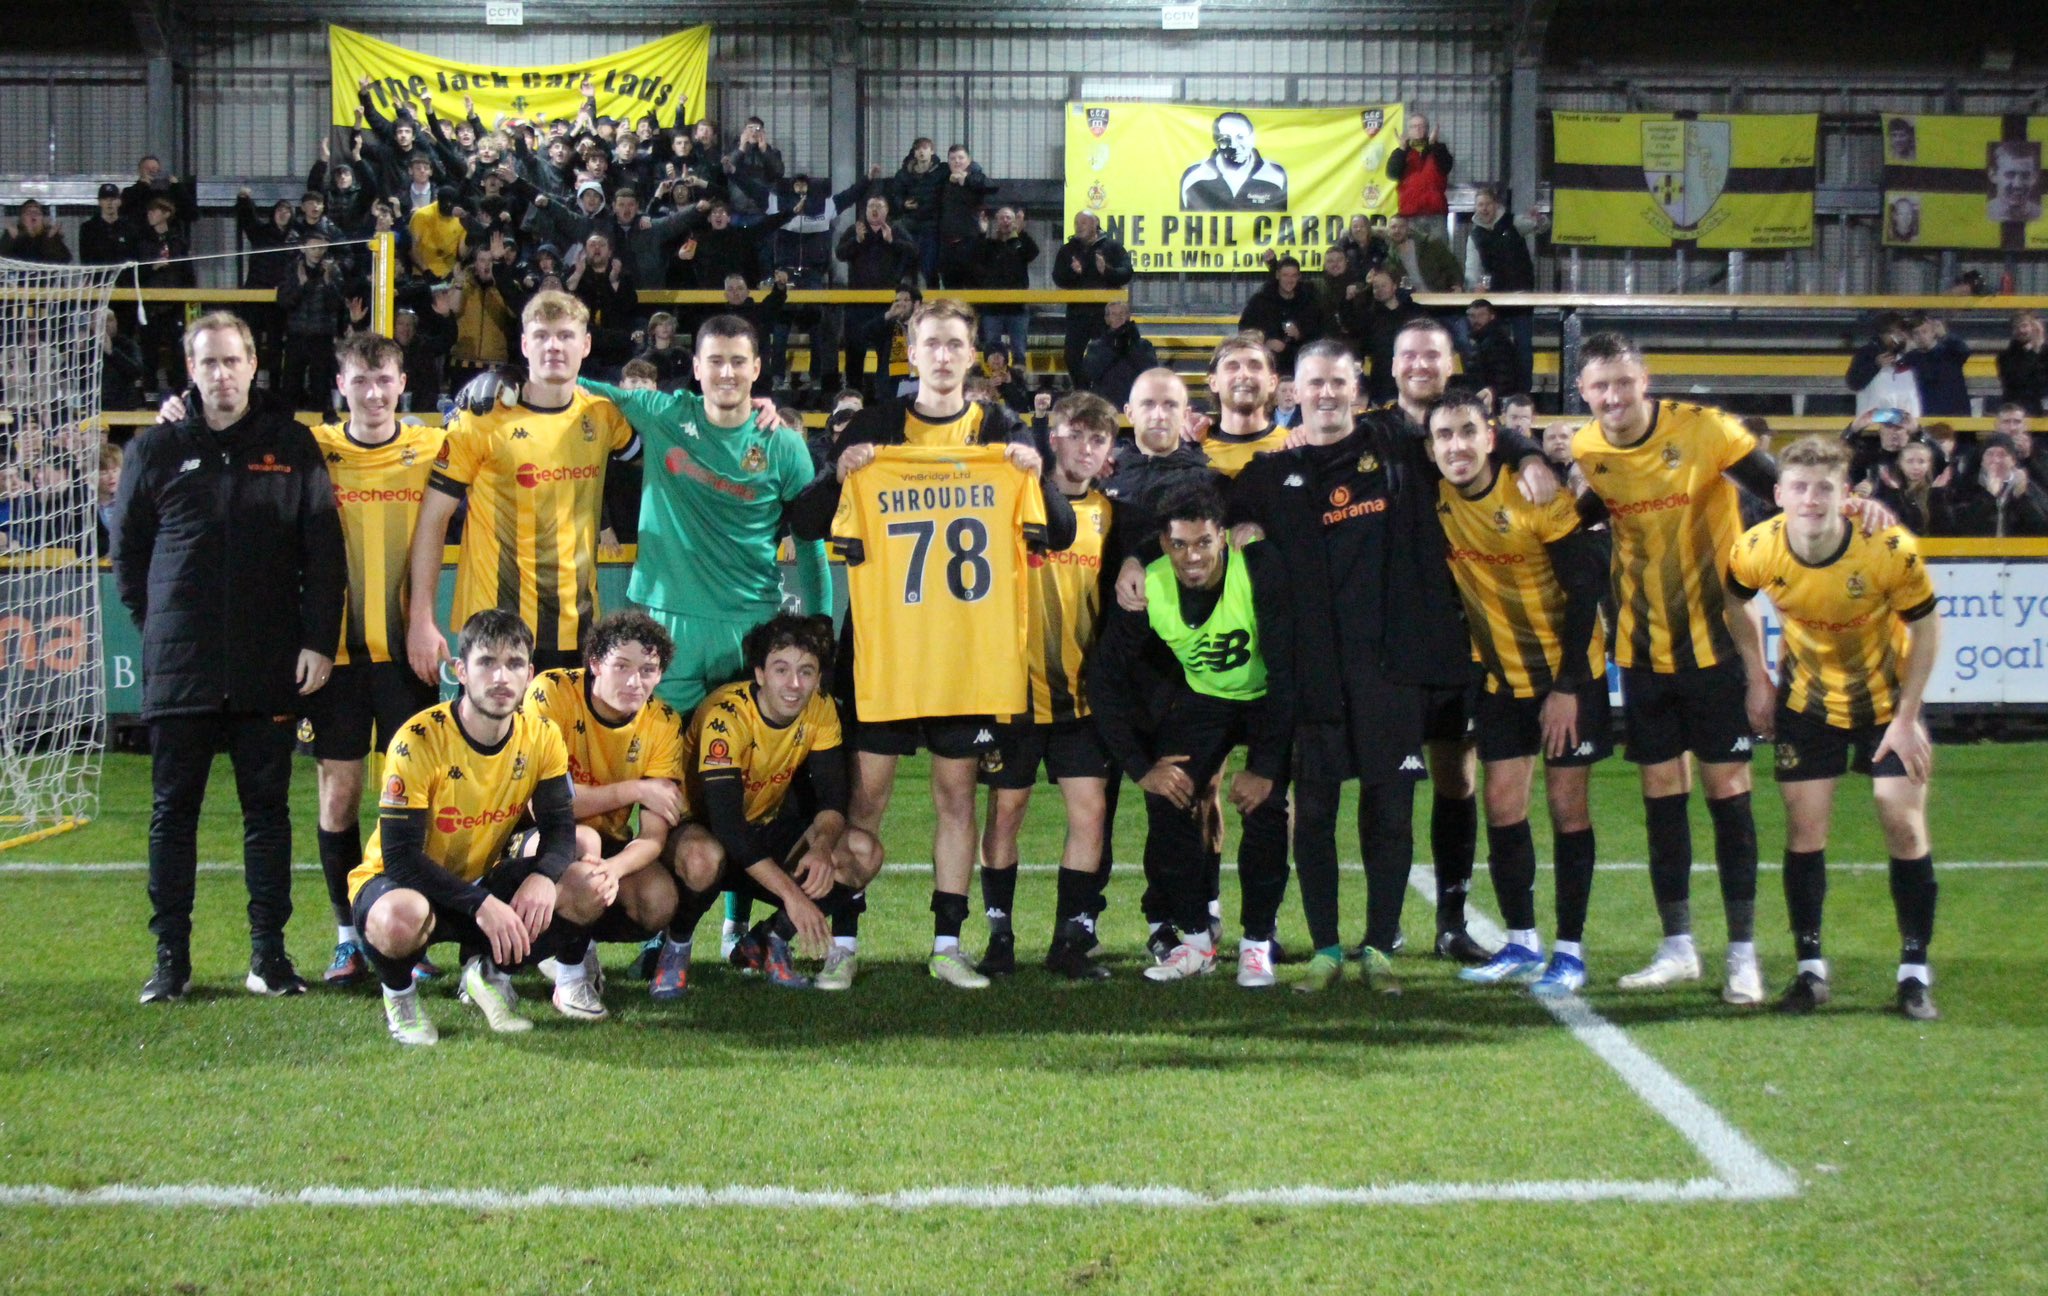 Southport FC players pay  tribute to former Life President Sam Shrouder